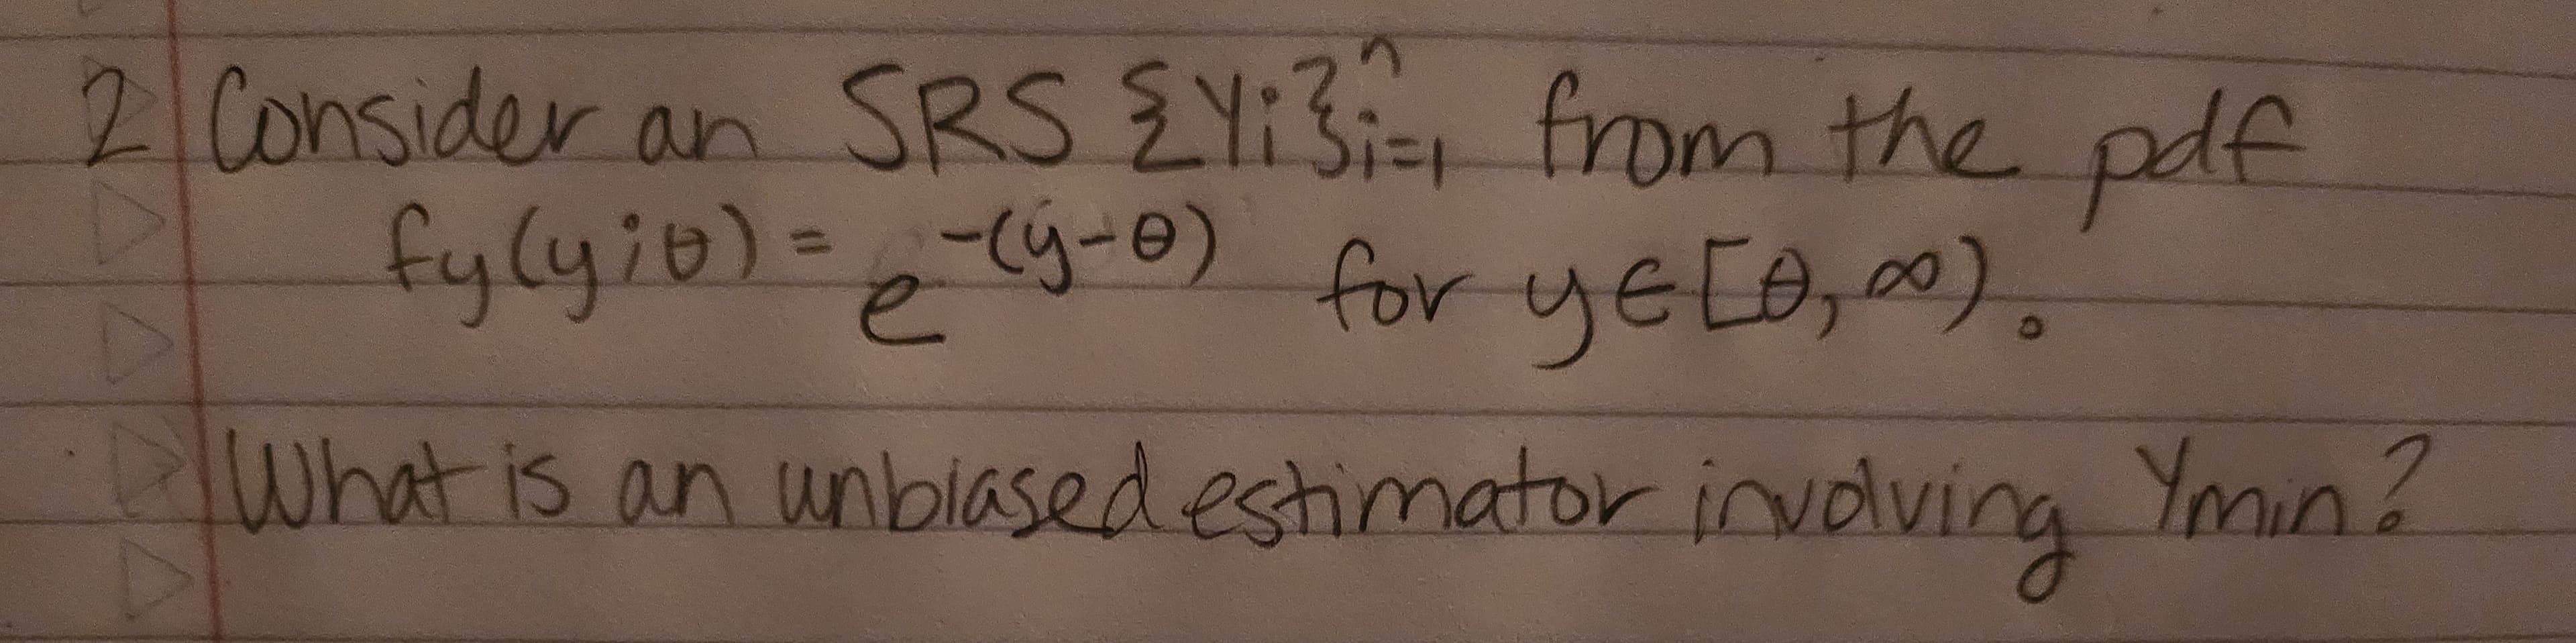 2 Consider an SRS 2Yi3;=, from the pdf
fy(y;o)= -(y-0) for y≤ [0,00).
ye
e
What is an unbiased estimator involving Ymin?